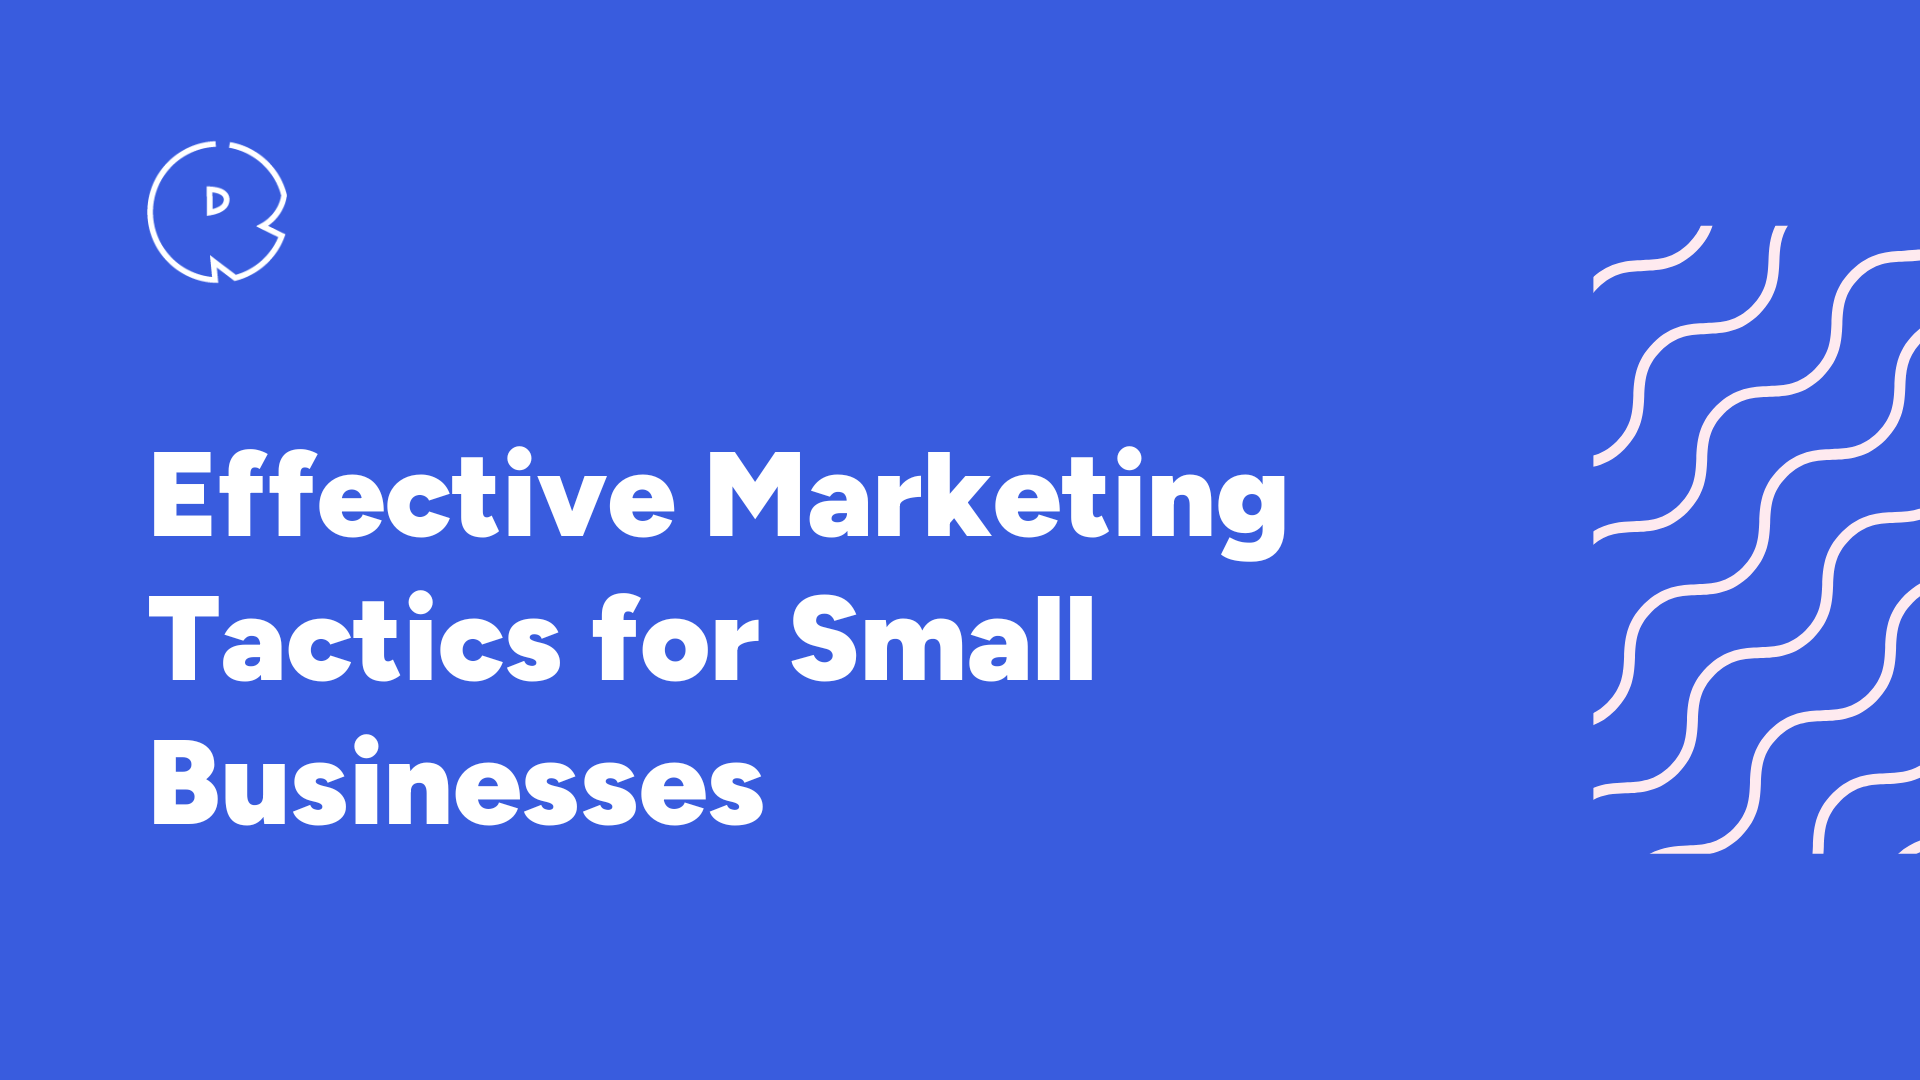 Effective Marketing Tactics for Small Businesses